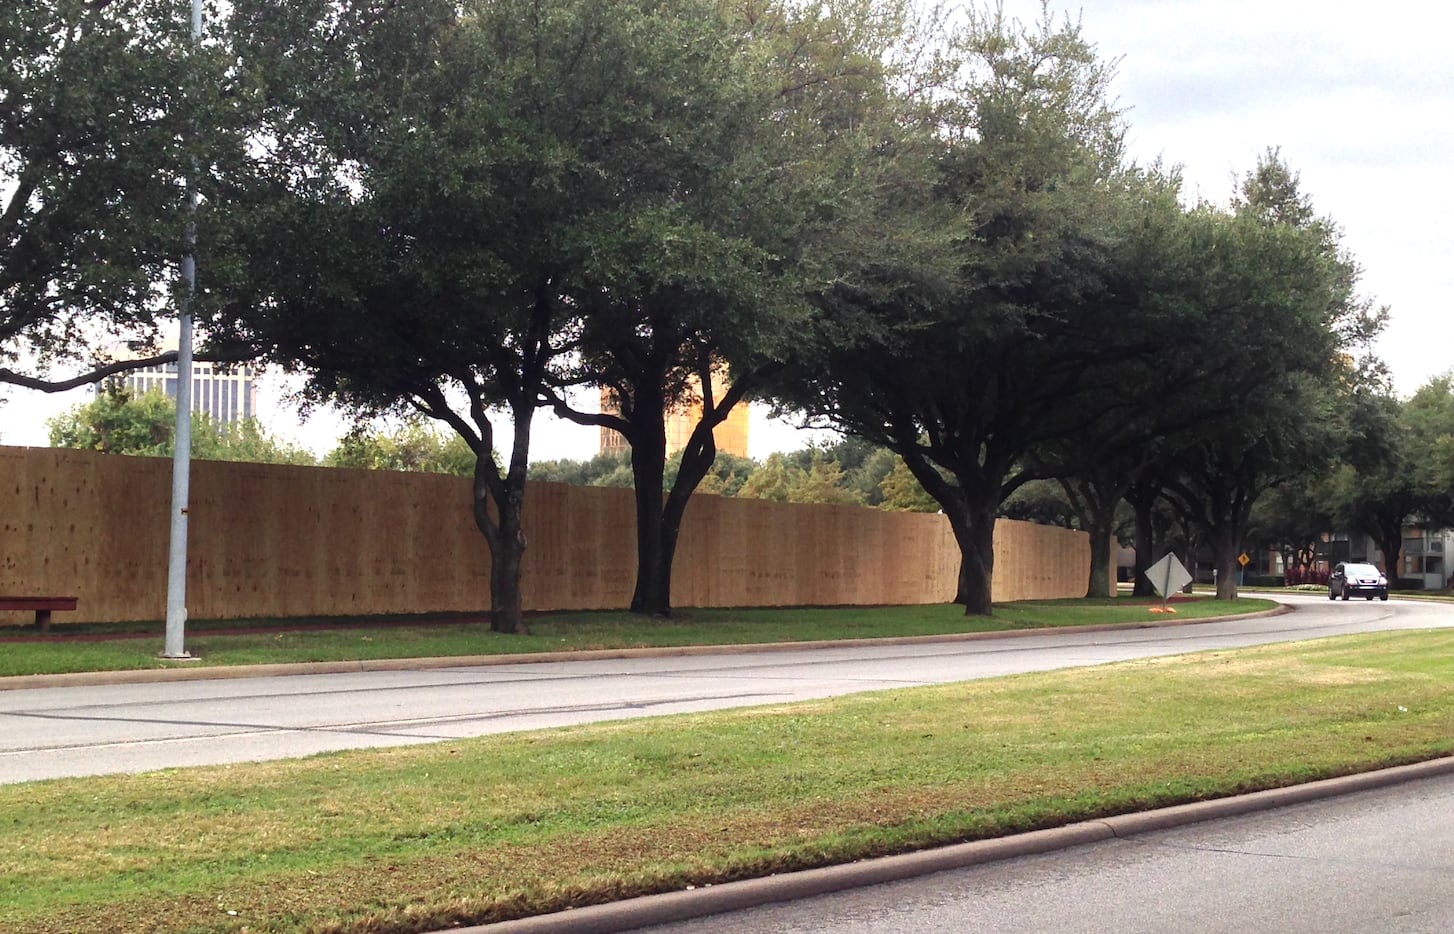 Construction fencing stretches along Southwestern Boulevard in The Village.